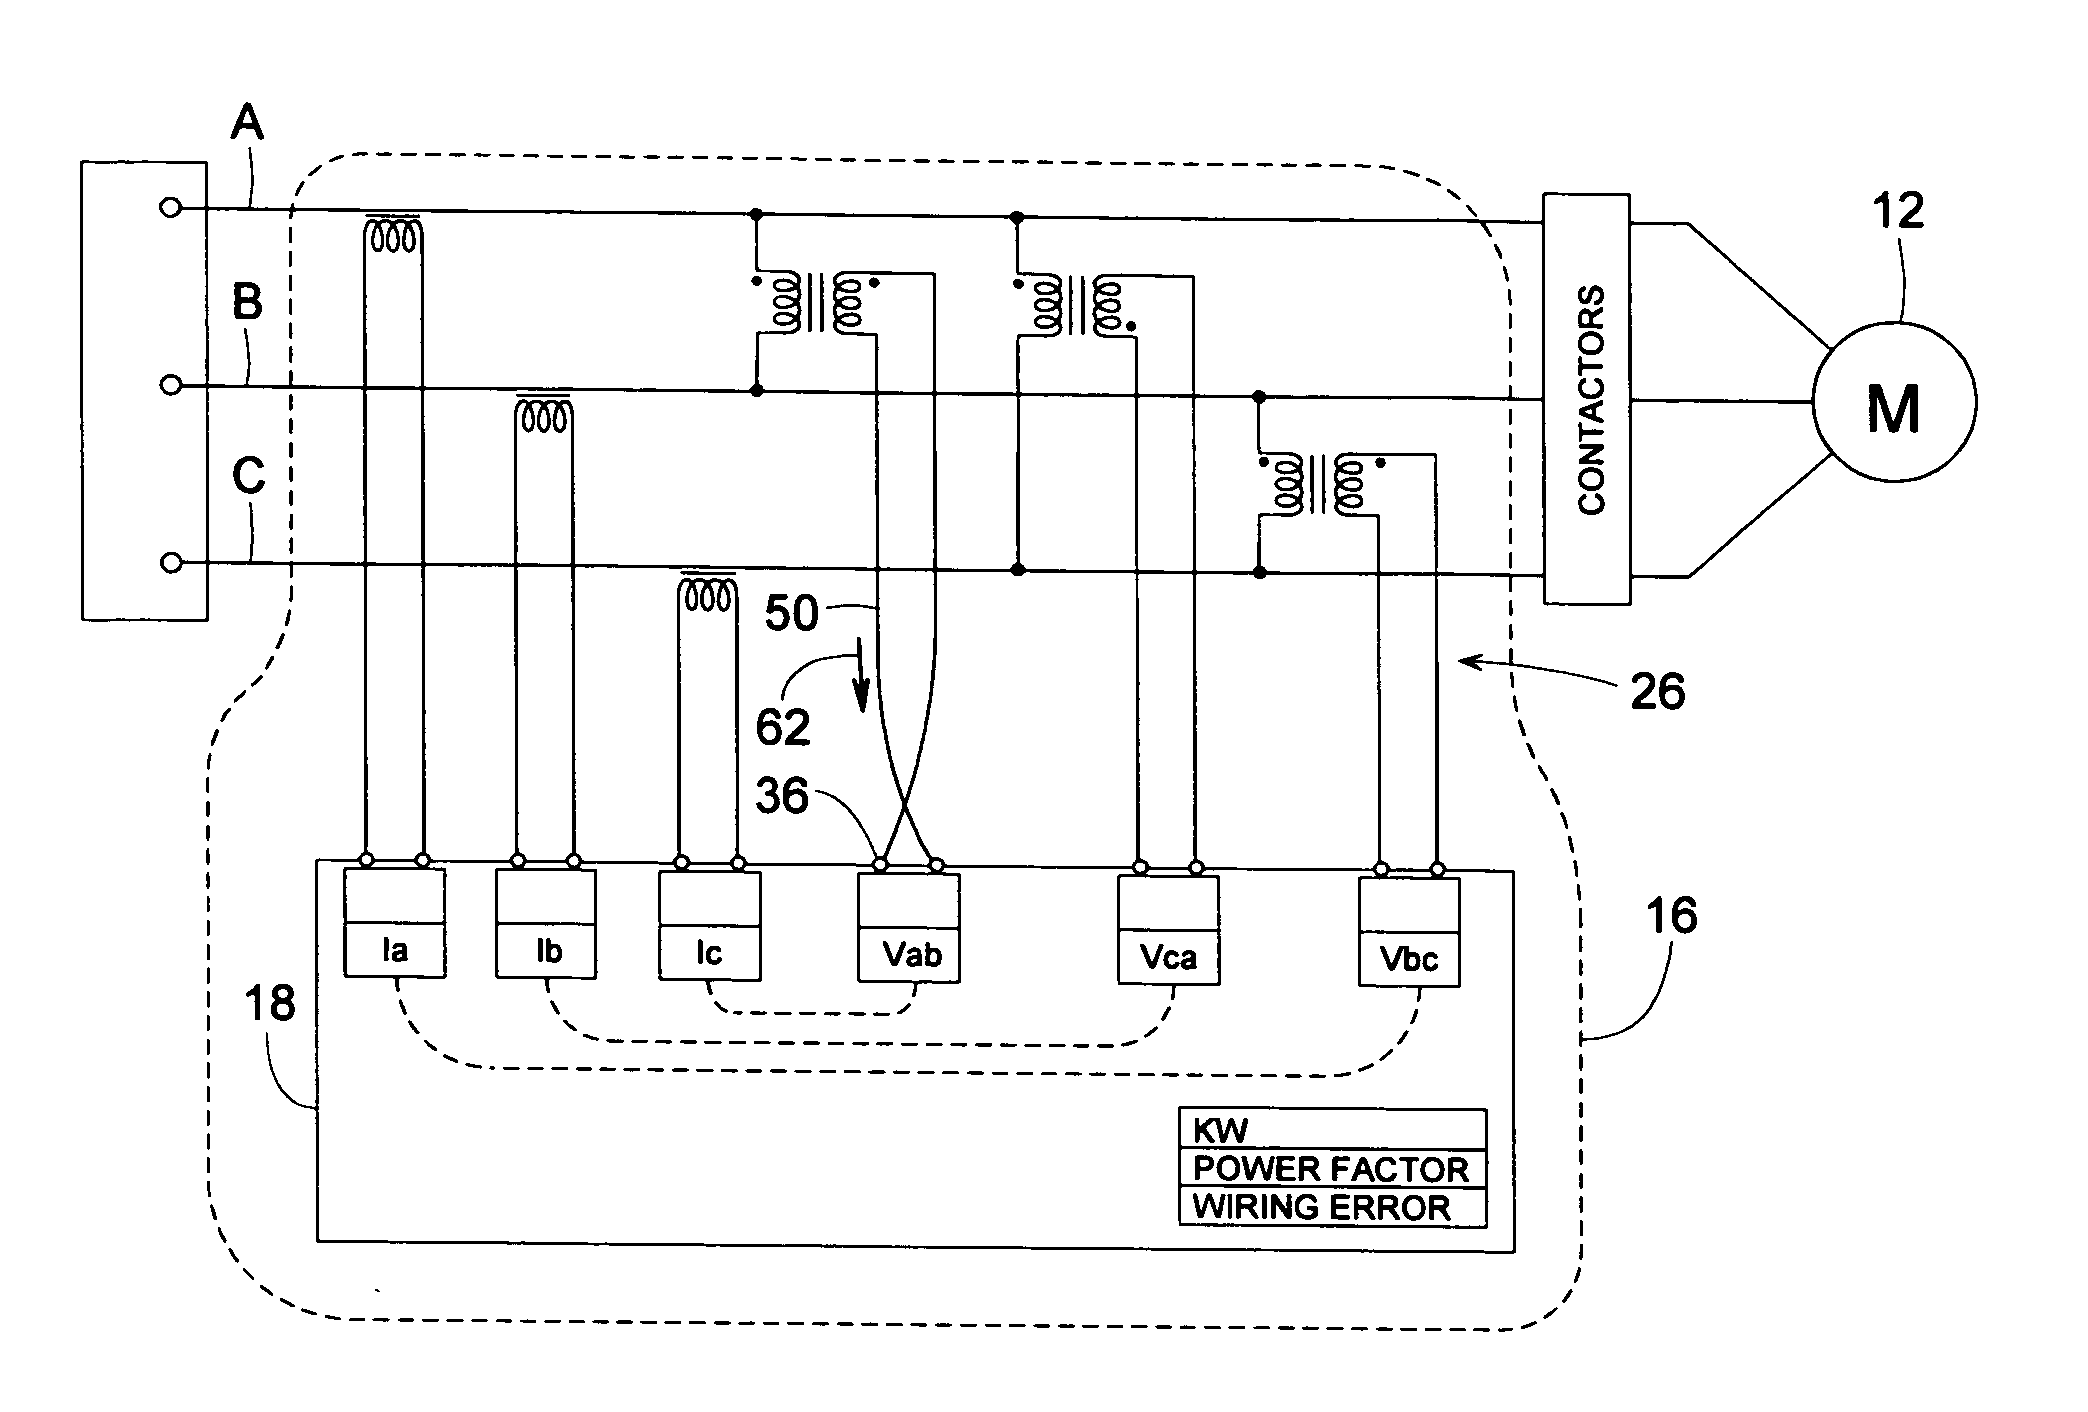 Method of recognizing signal mis-wiring of a three-phase circuit